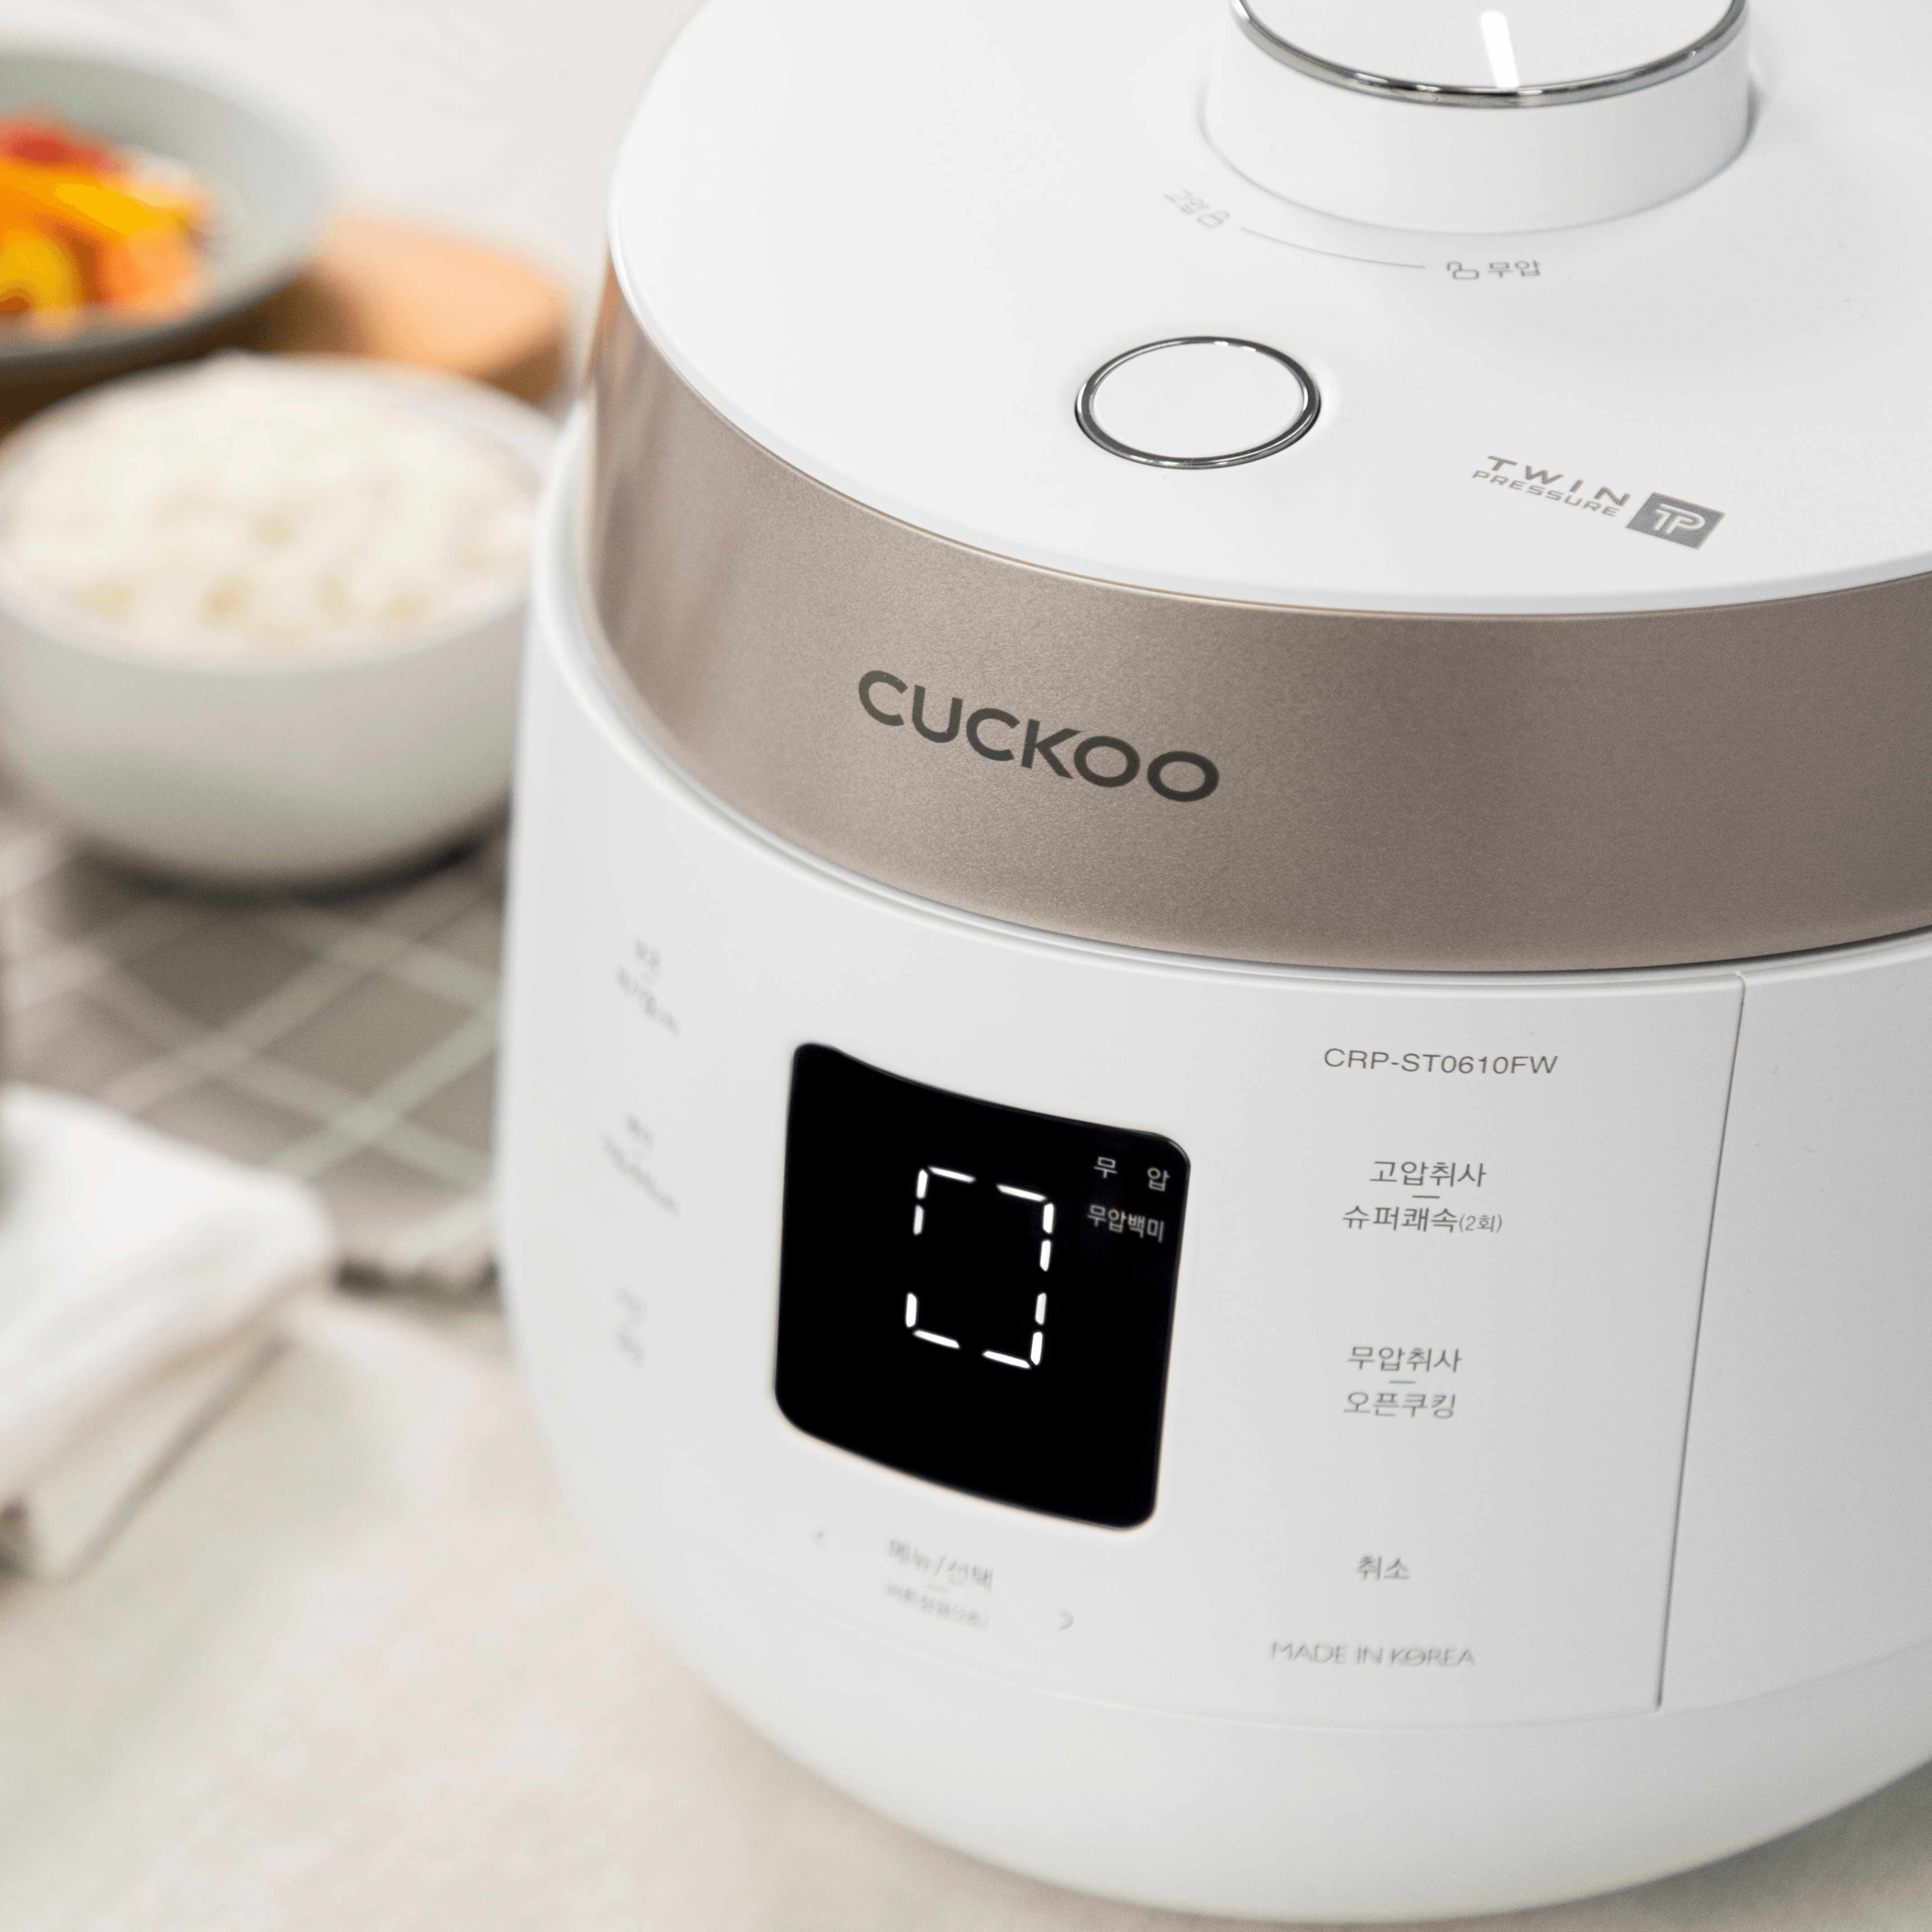 CUCKOO CR-3032 Commercial Rice Cooker 30-Cups